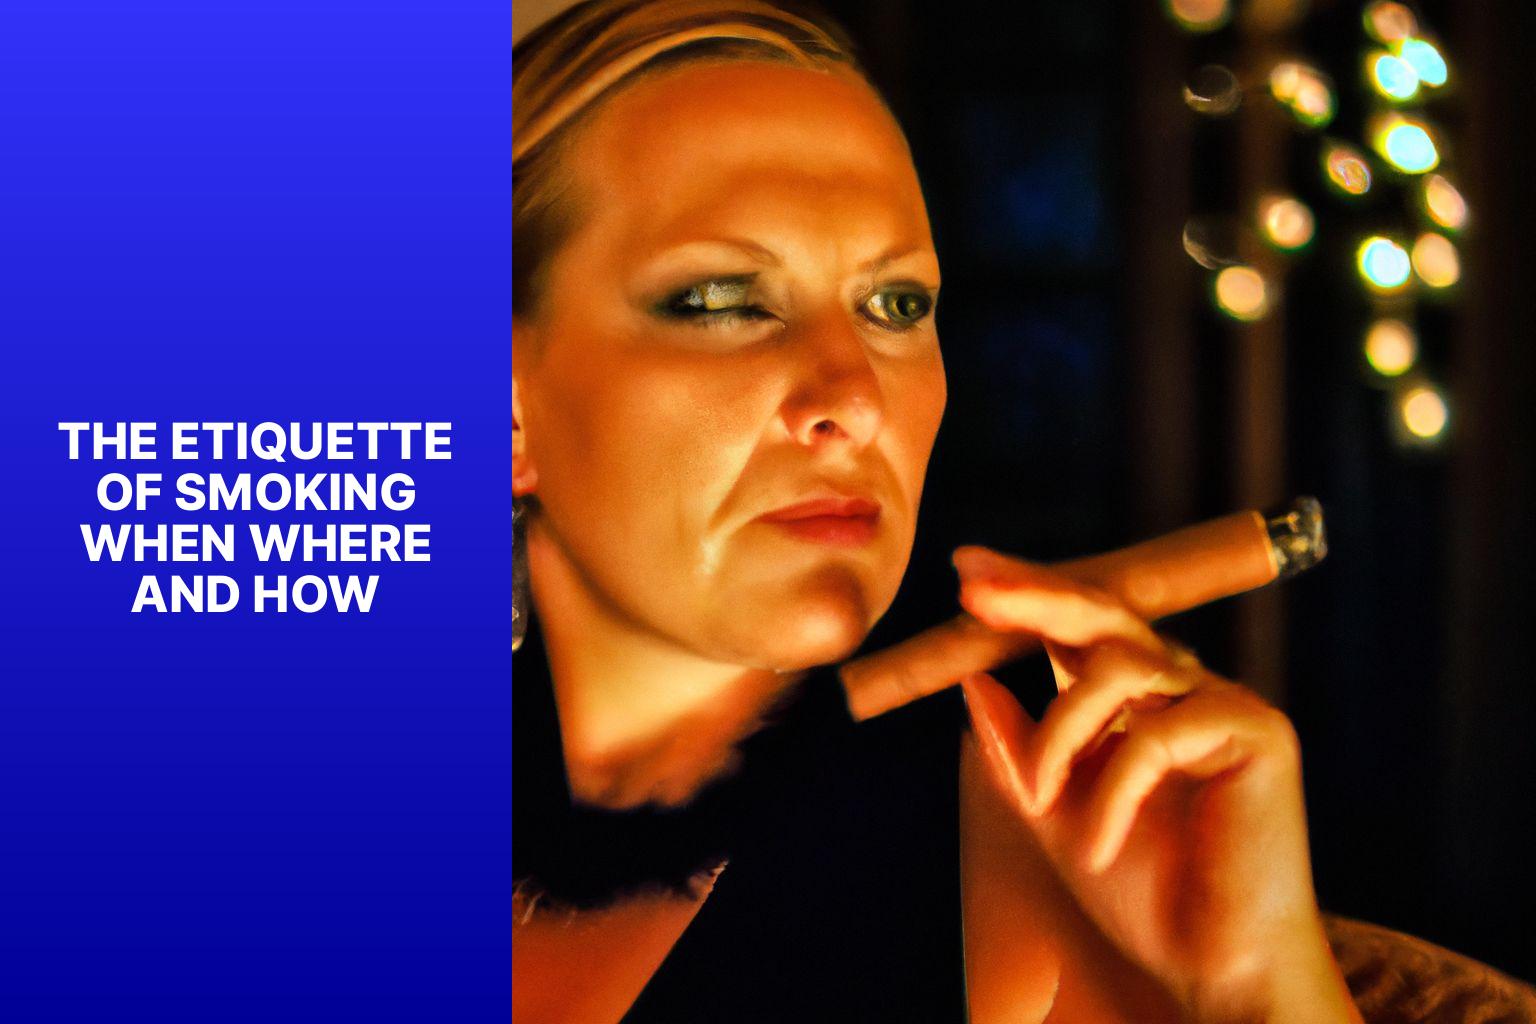 The Etiquette of Smoking: When, Where, and How